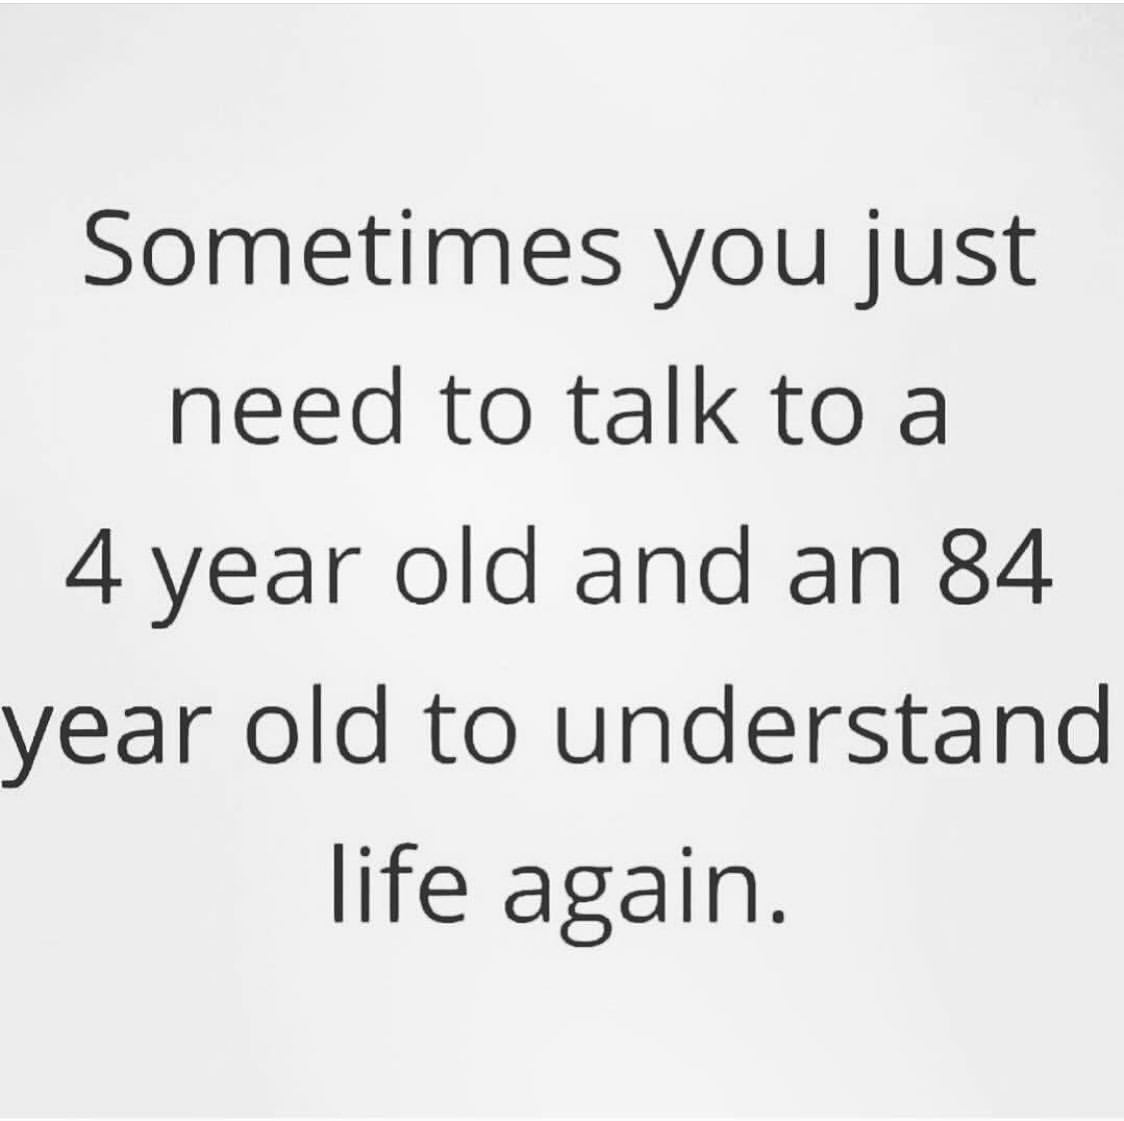 Sometimes you just need to talk to a 4 year old and an 84 year old to understand life again.